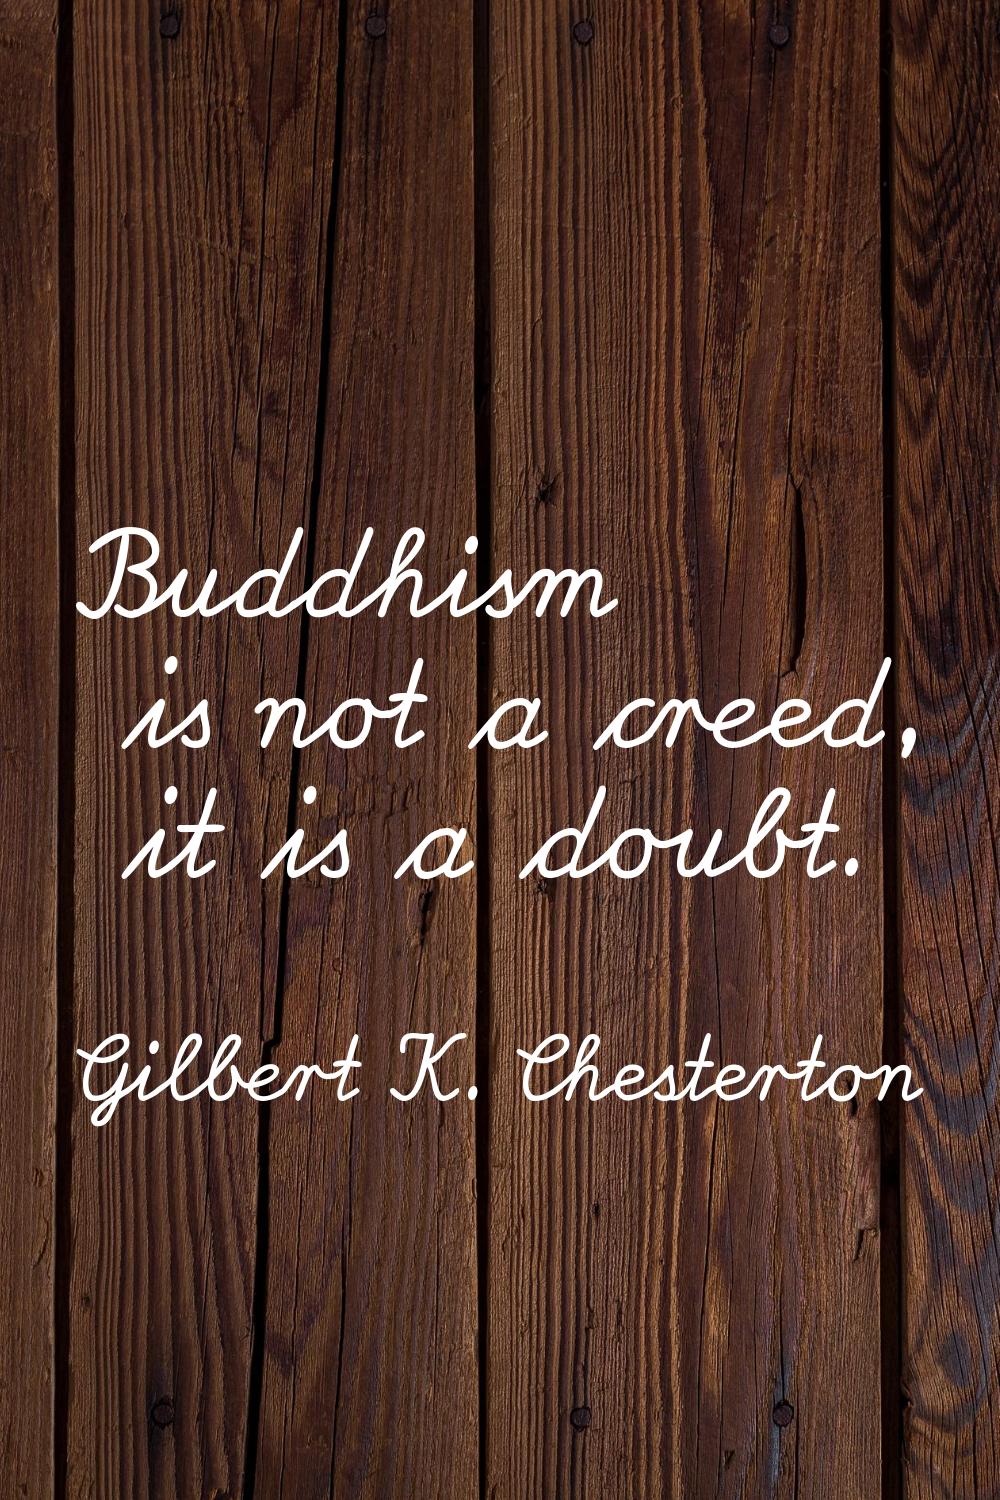 Buddhism is not a creed, it is a doubt.